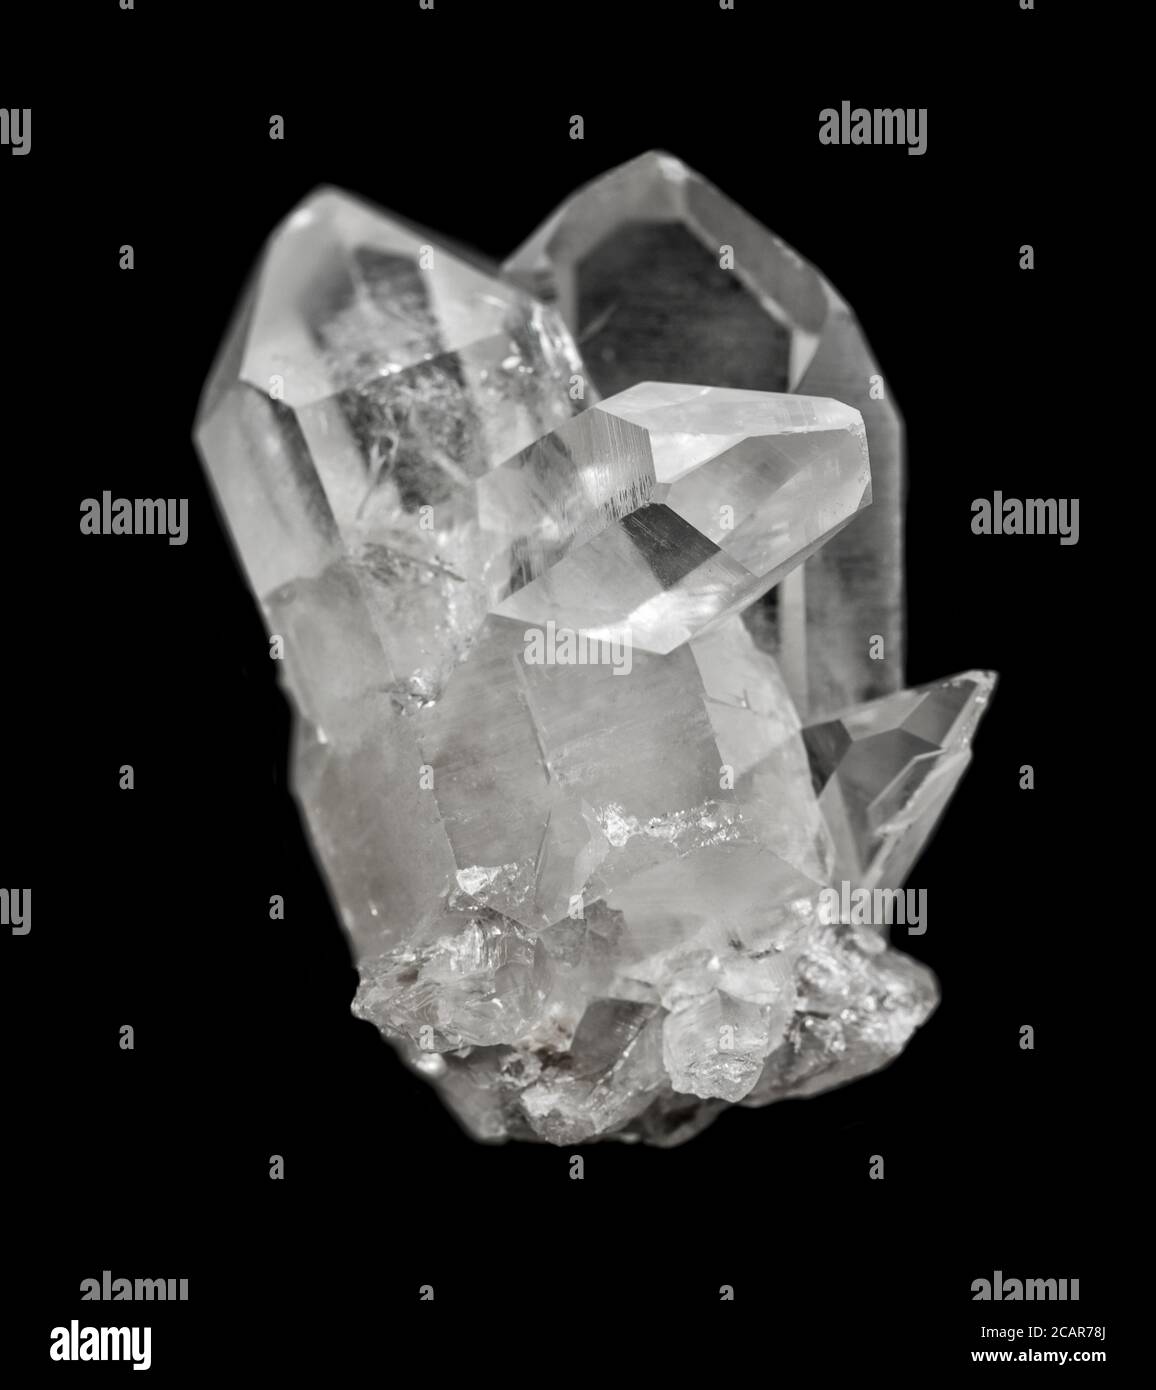 Cluster of several transparent rock crystals close-up, isolated on a black background Stock Photo